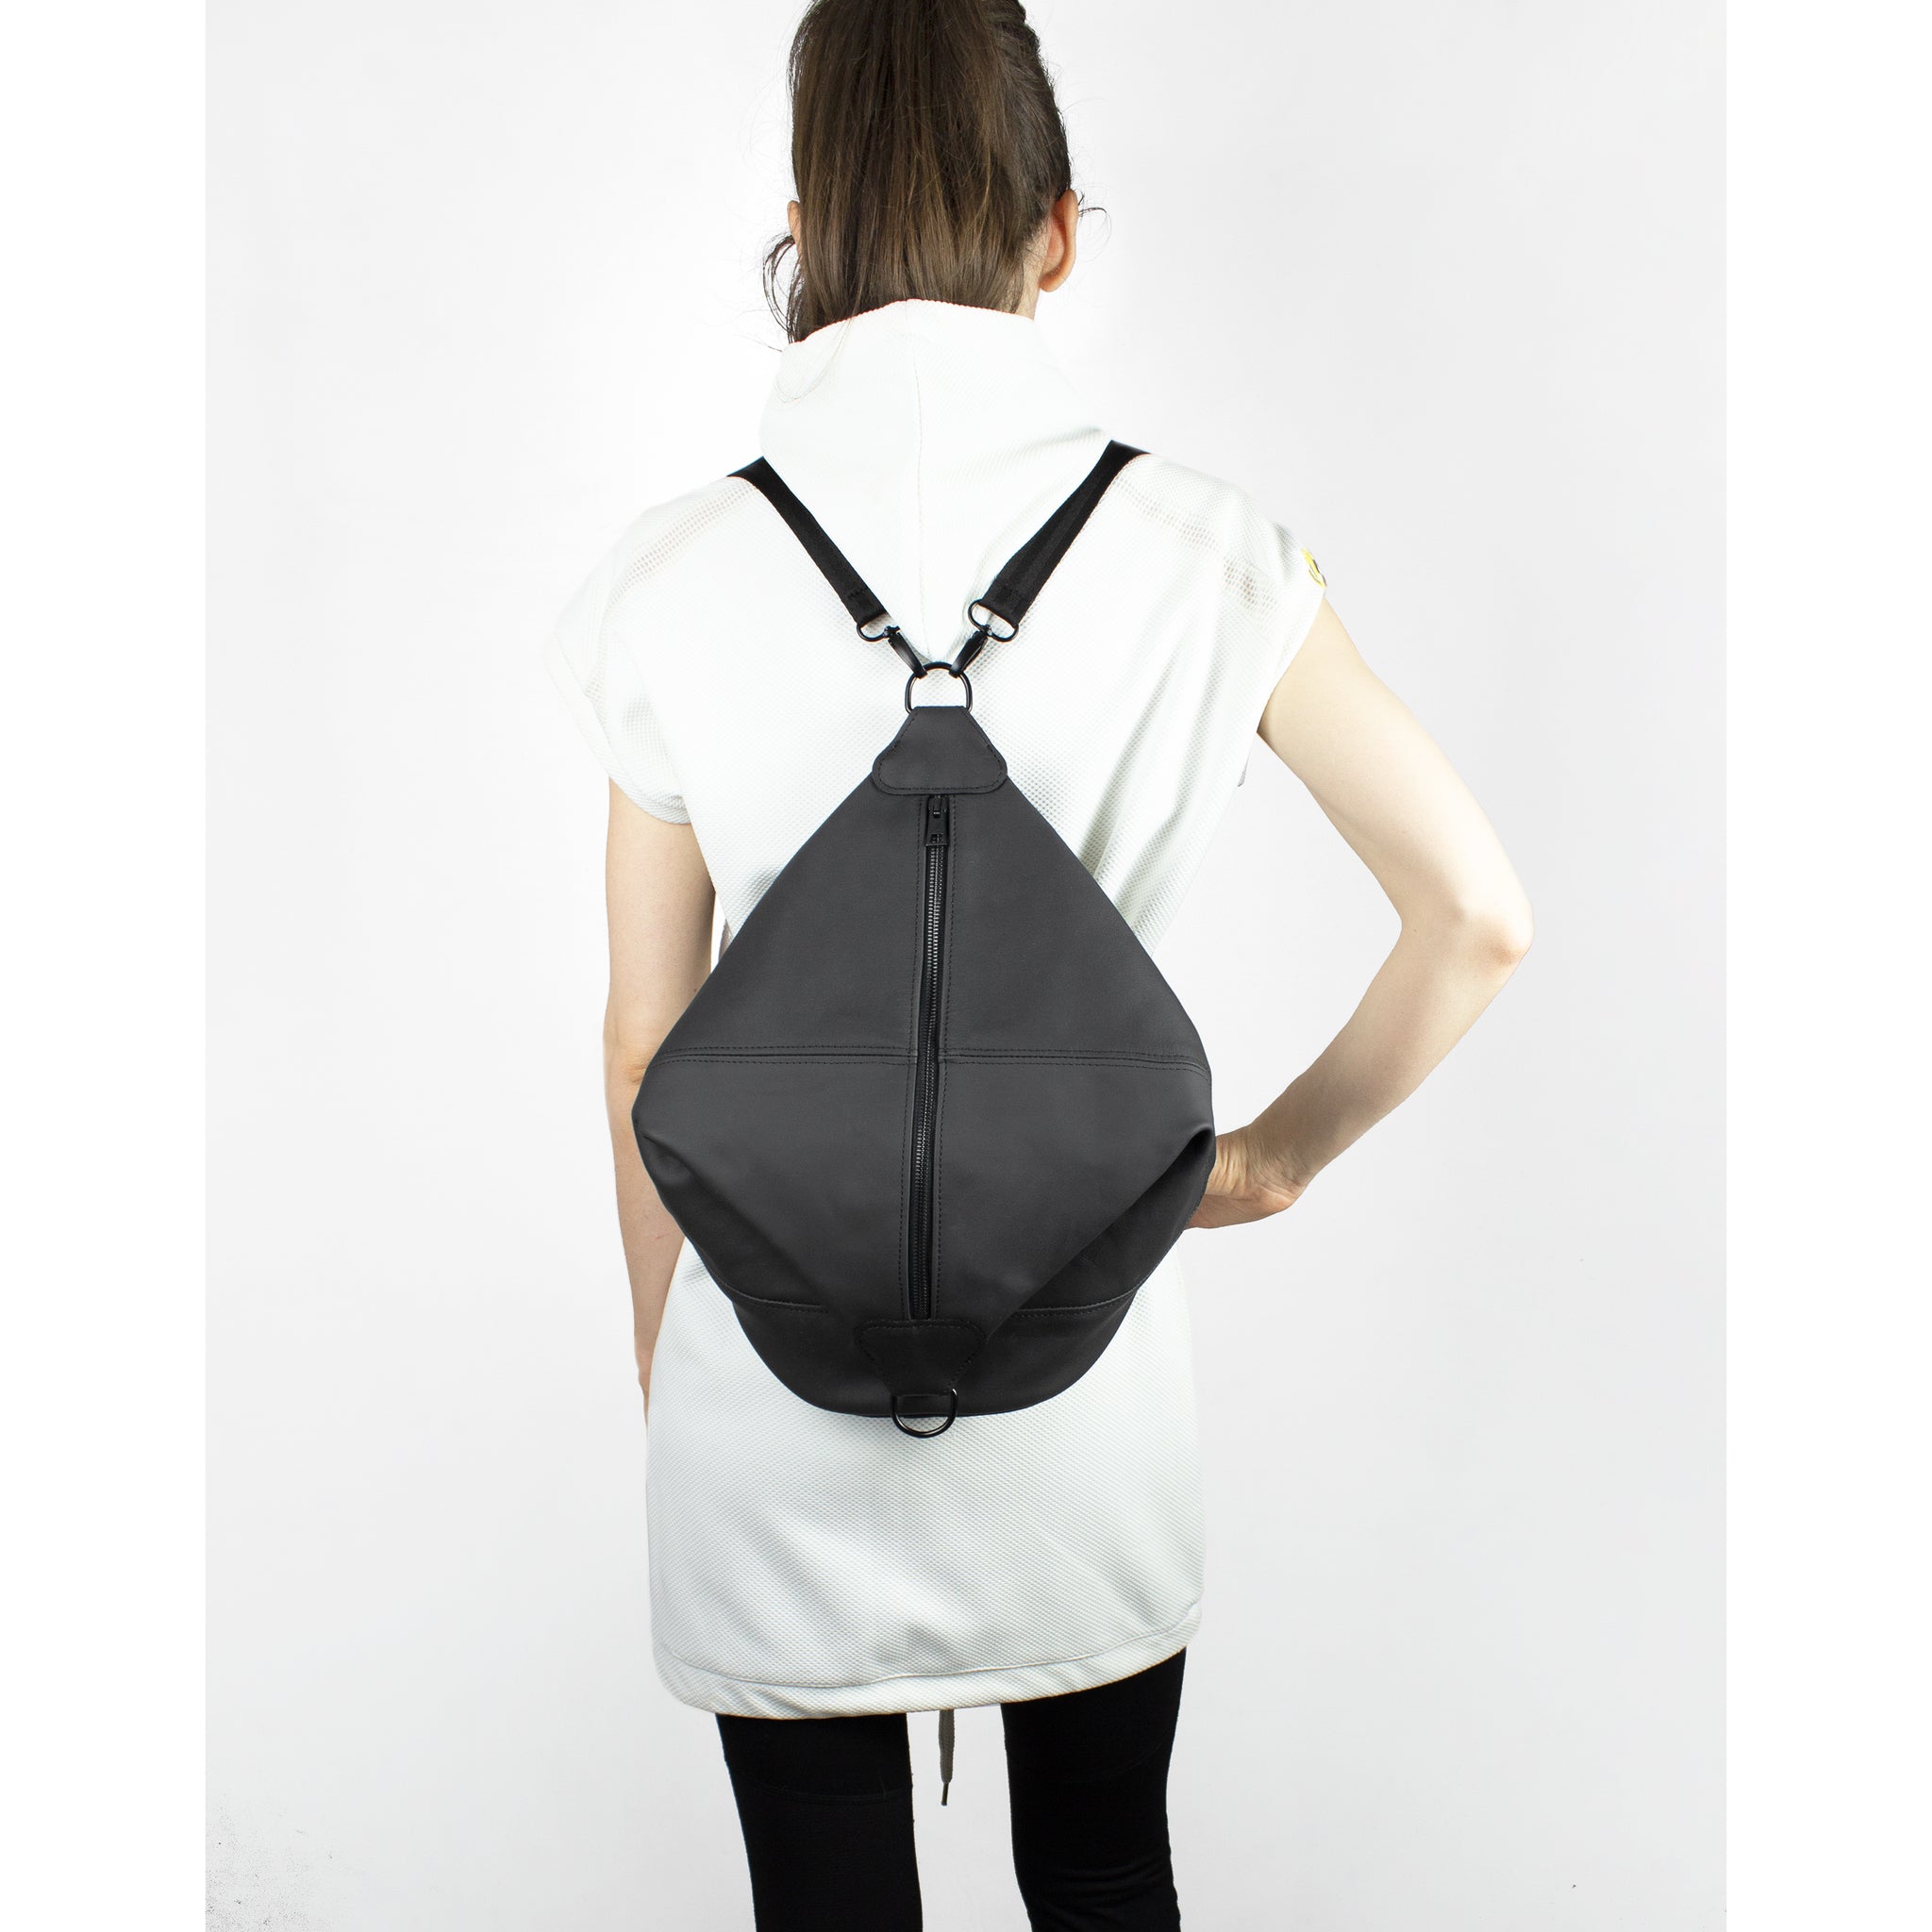 ZION convertible backpack with strap